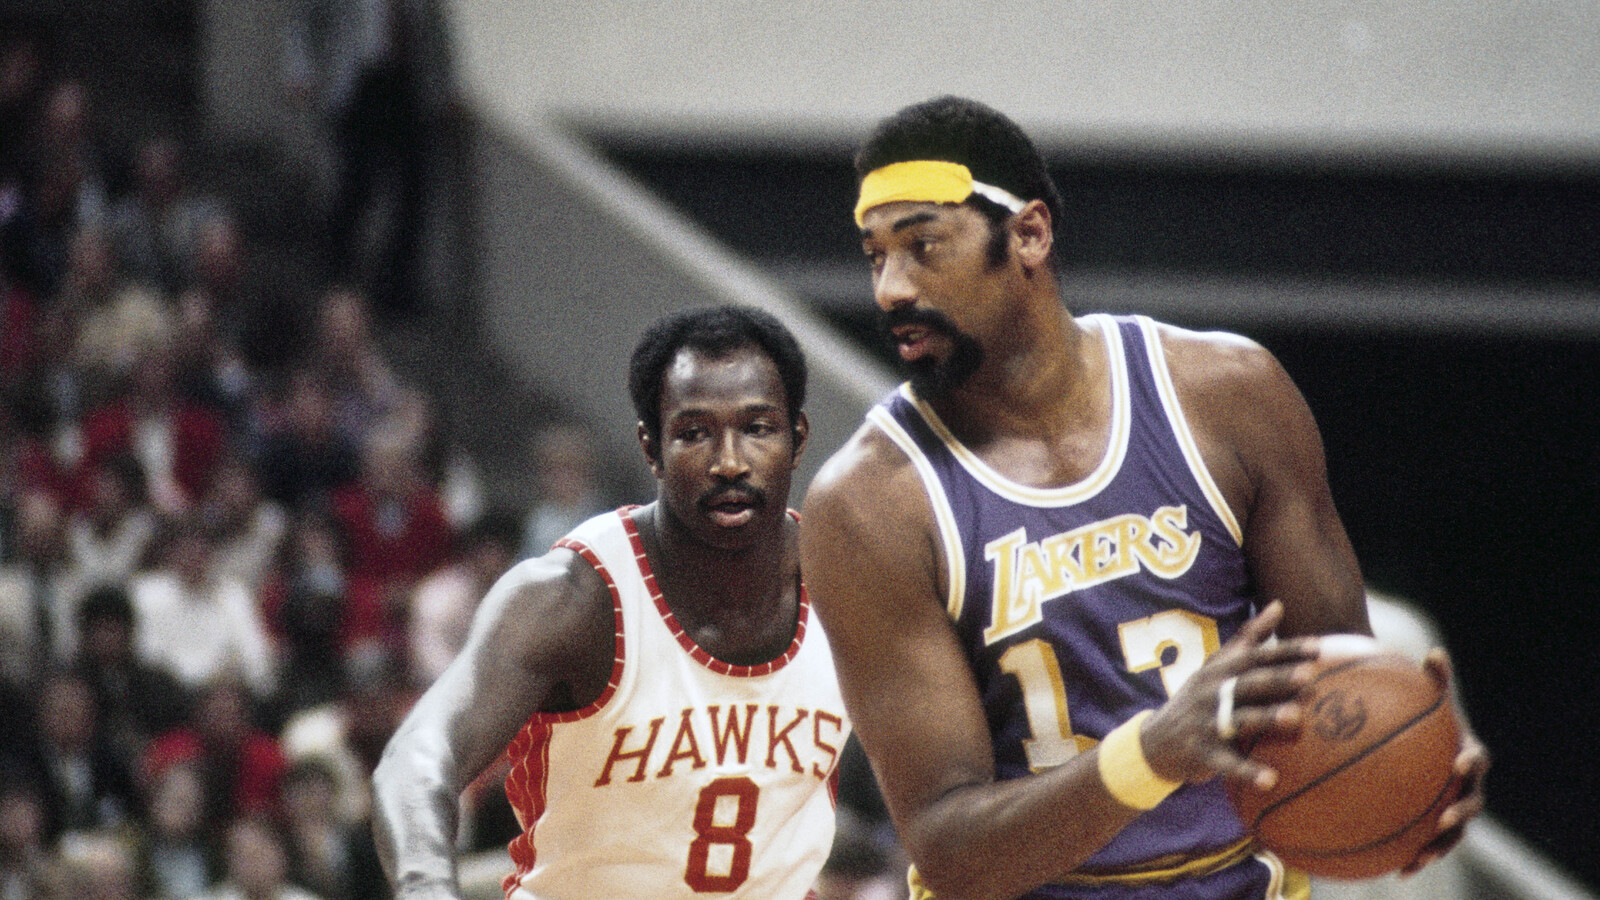 I Was in Great Company as a Loser”: Wilt Chamberlain, the Only